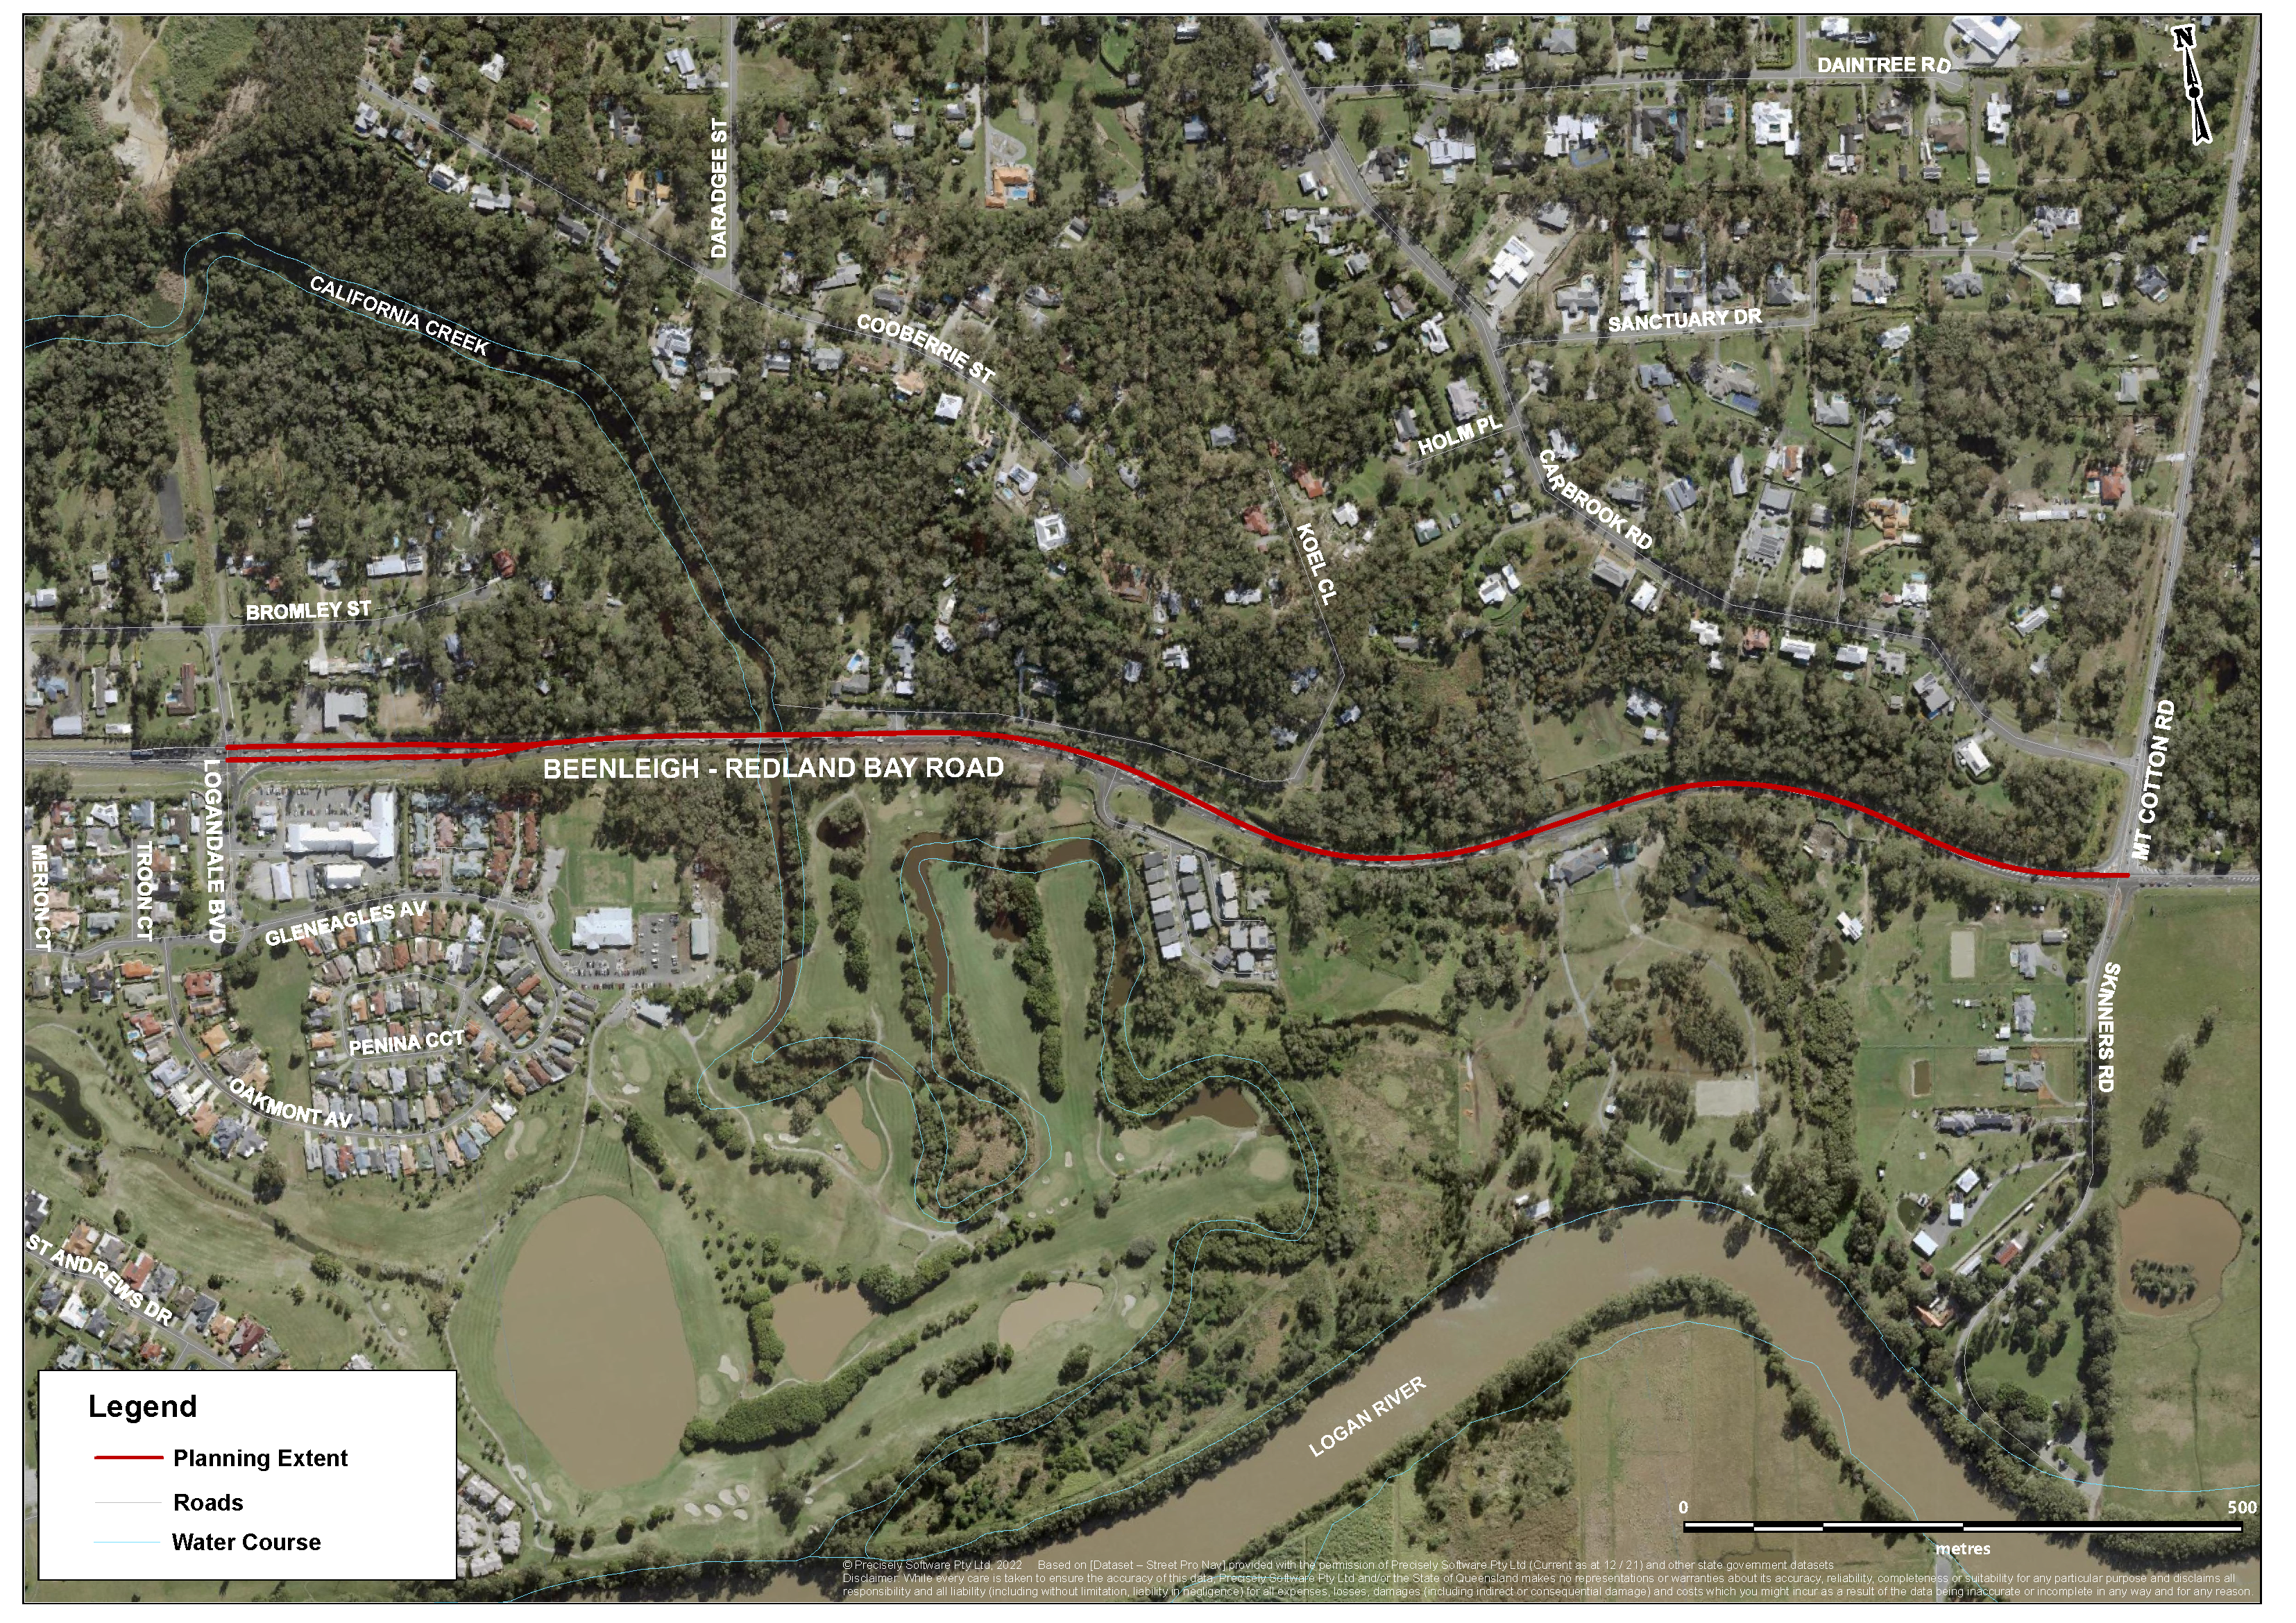 Beenleigh Redland Bay Road Logandale Boulevard to Mount Cotton Road upgrade planning